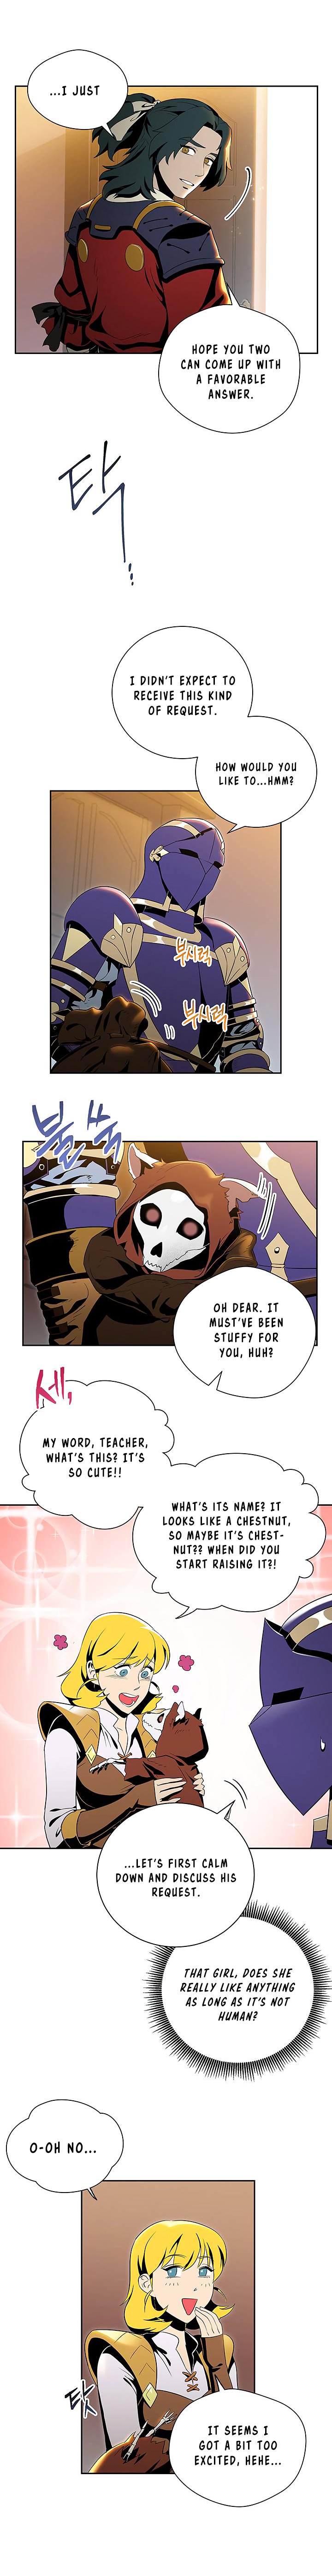 Skeleton Soldier chapter 70 page 13